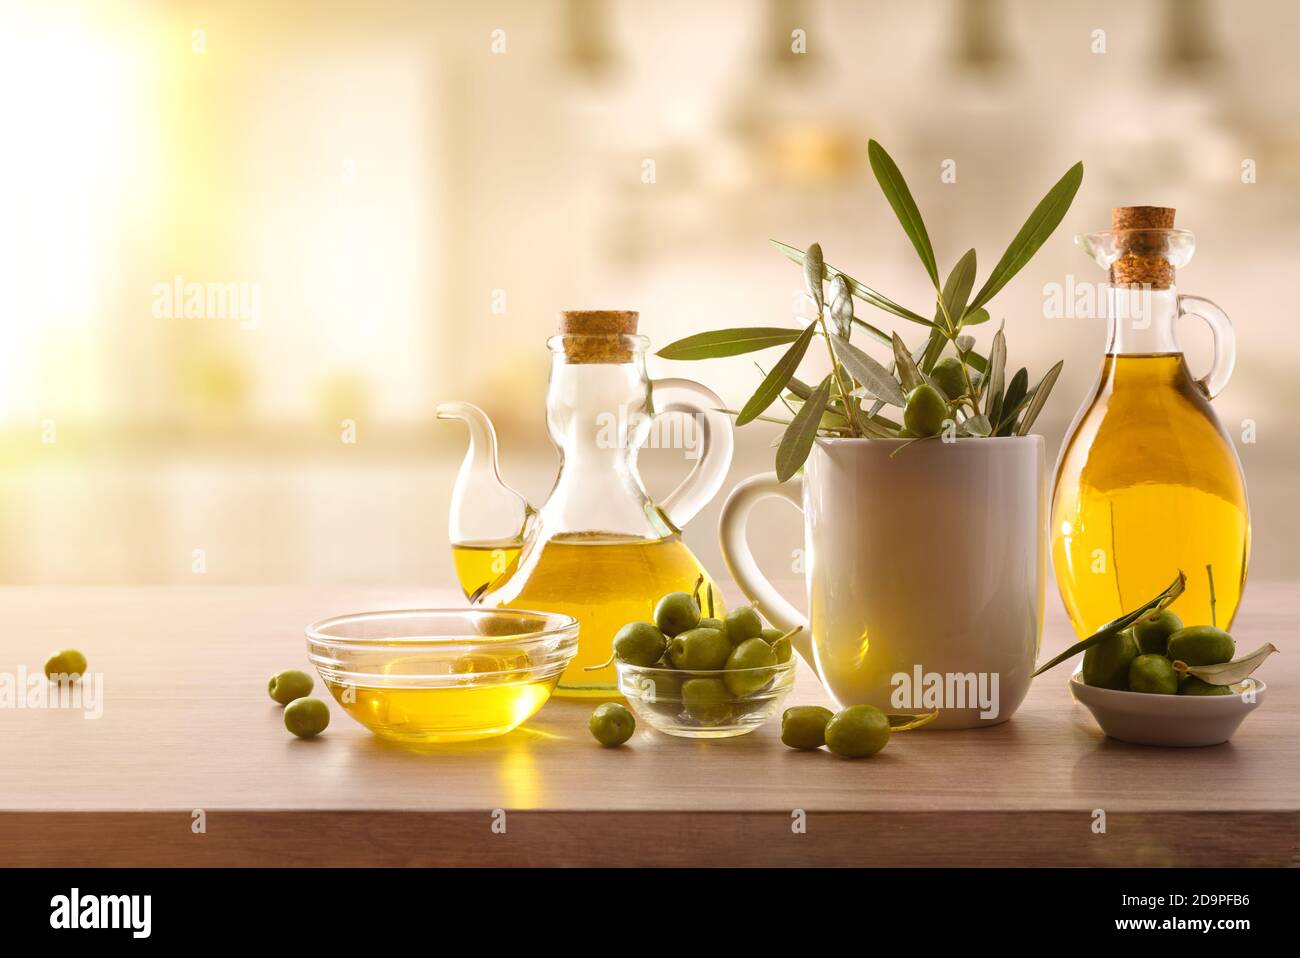 Virgin olive oil in two glass containers and harvest olives on the wooden bench in a kitchen. Front view. Stock Photo